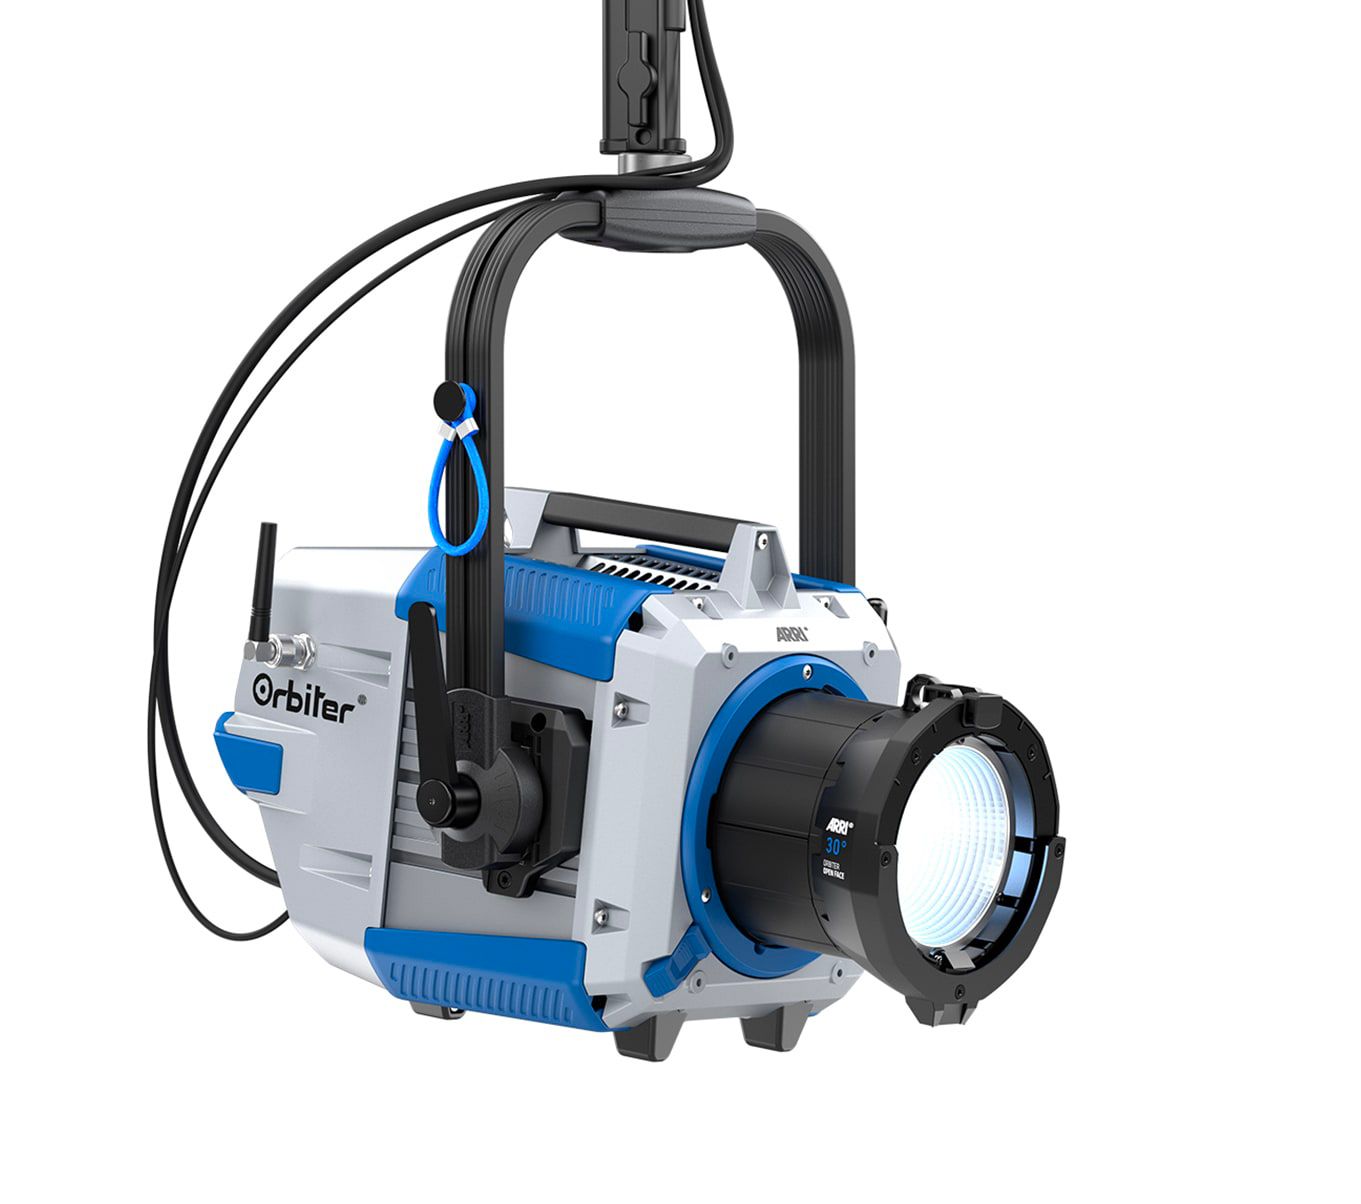 ARRI - Orbiter (Blue/Silver) without accessories